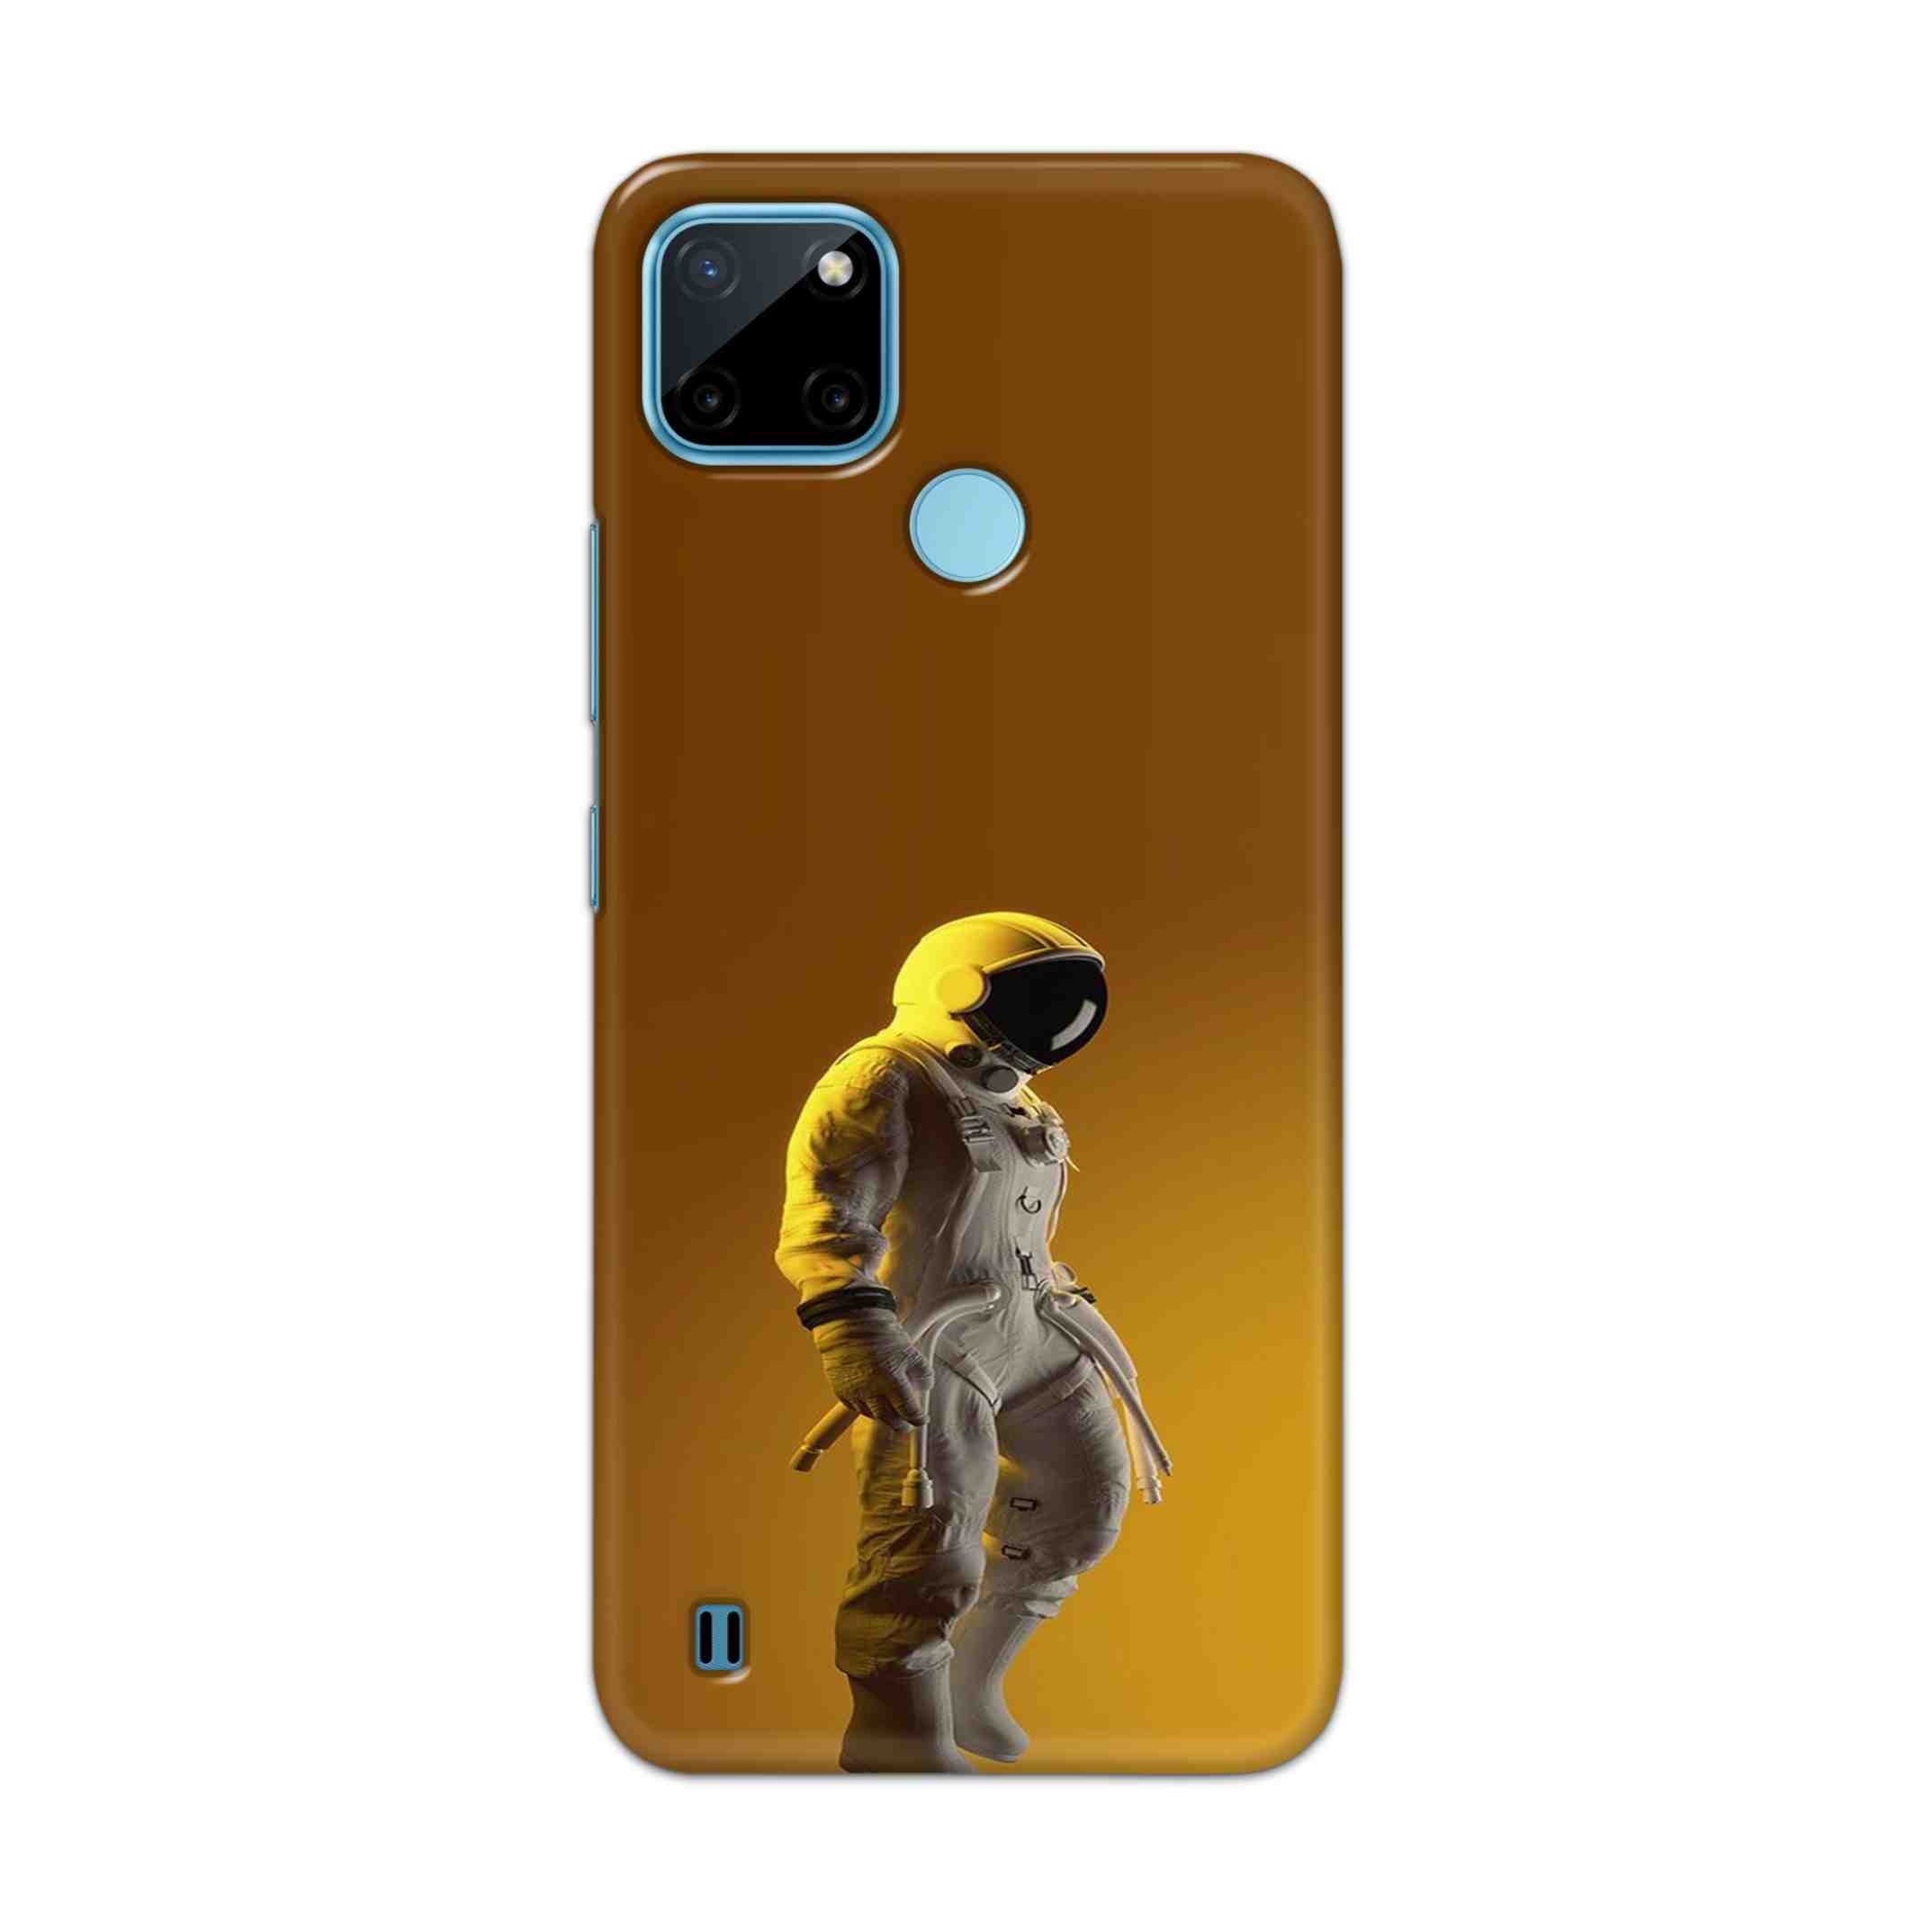 Buy Yellow Astronaut Hard Back Mobile Phone Case Cover For Realme C21Y Online